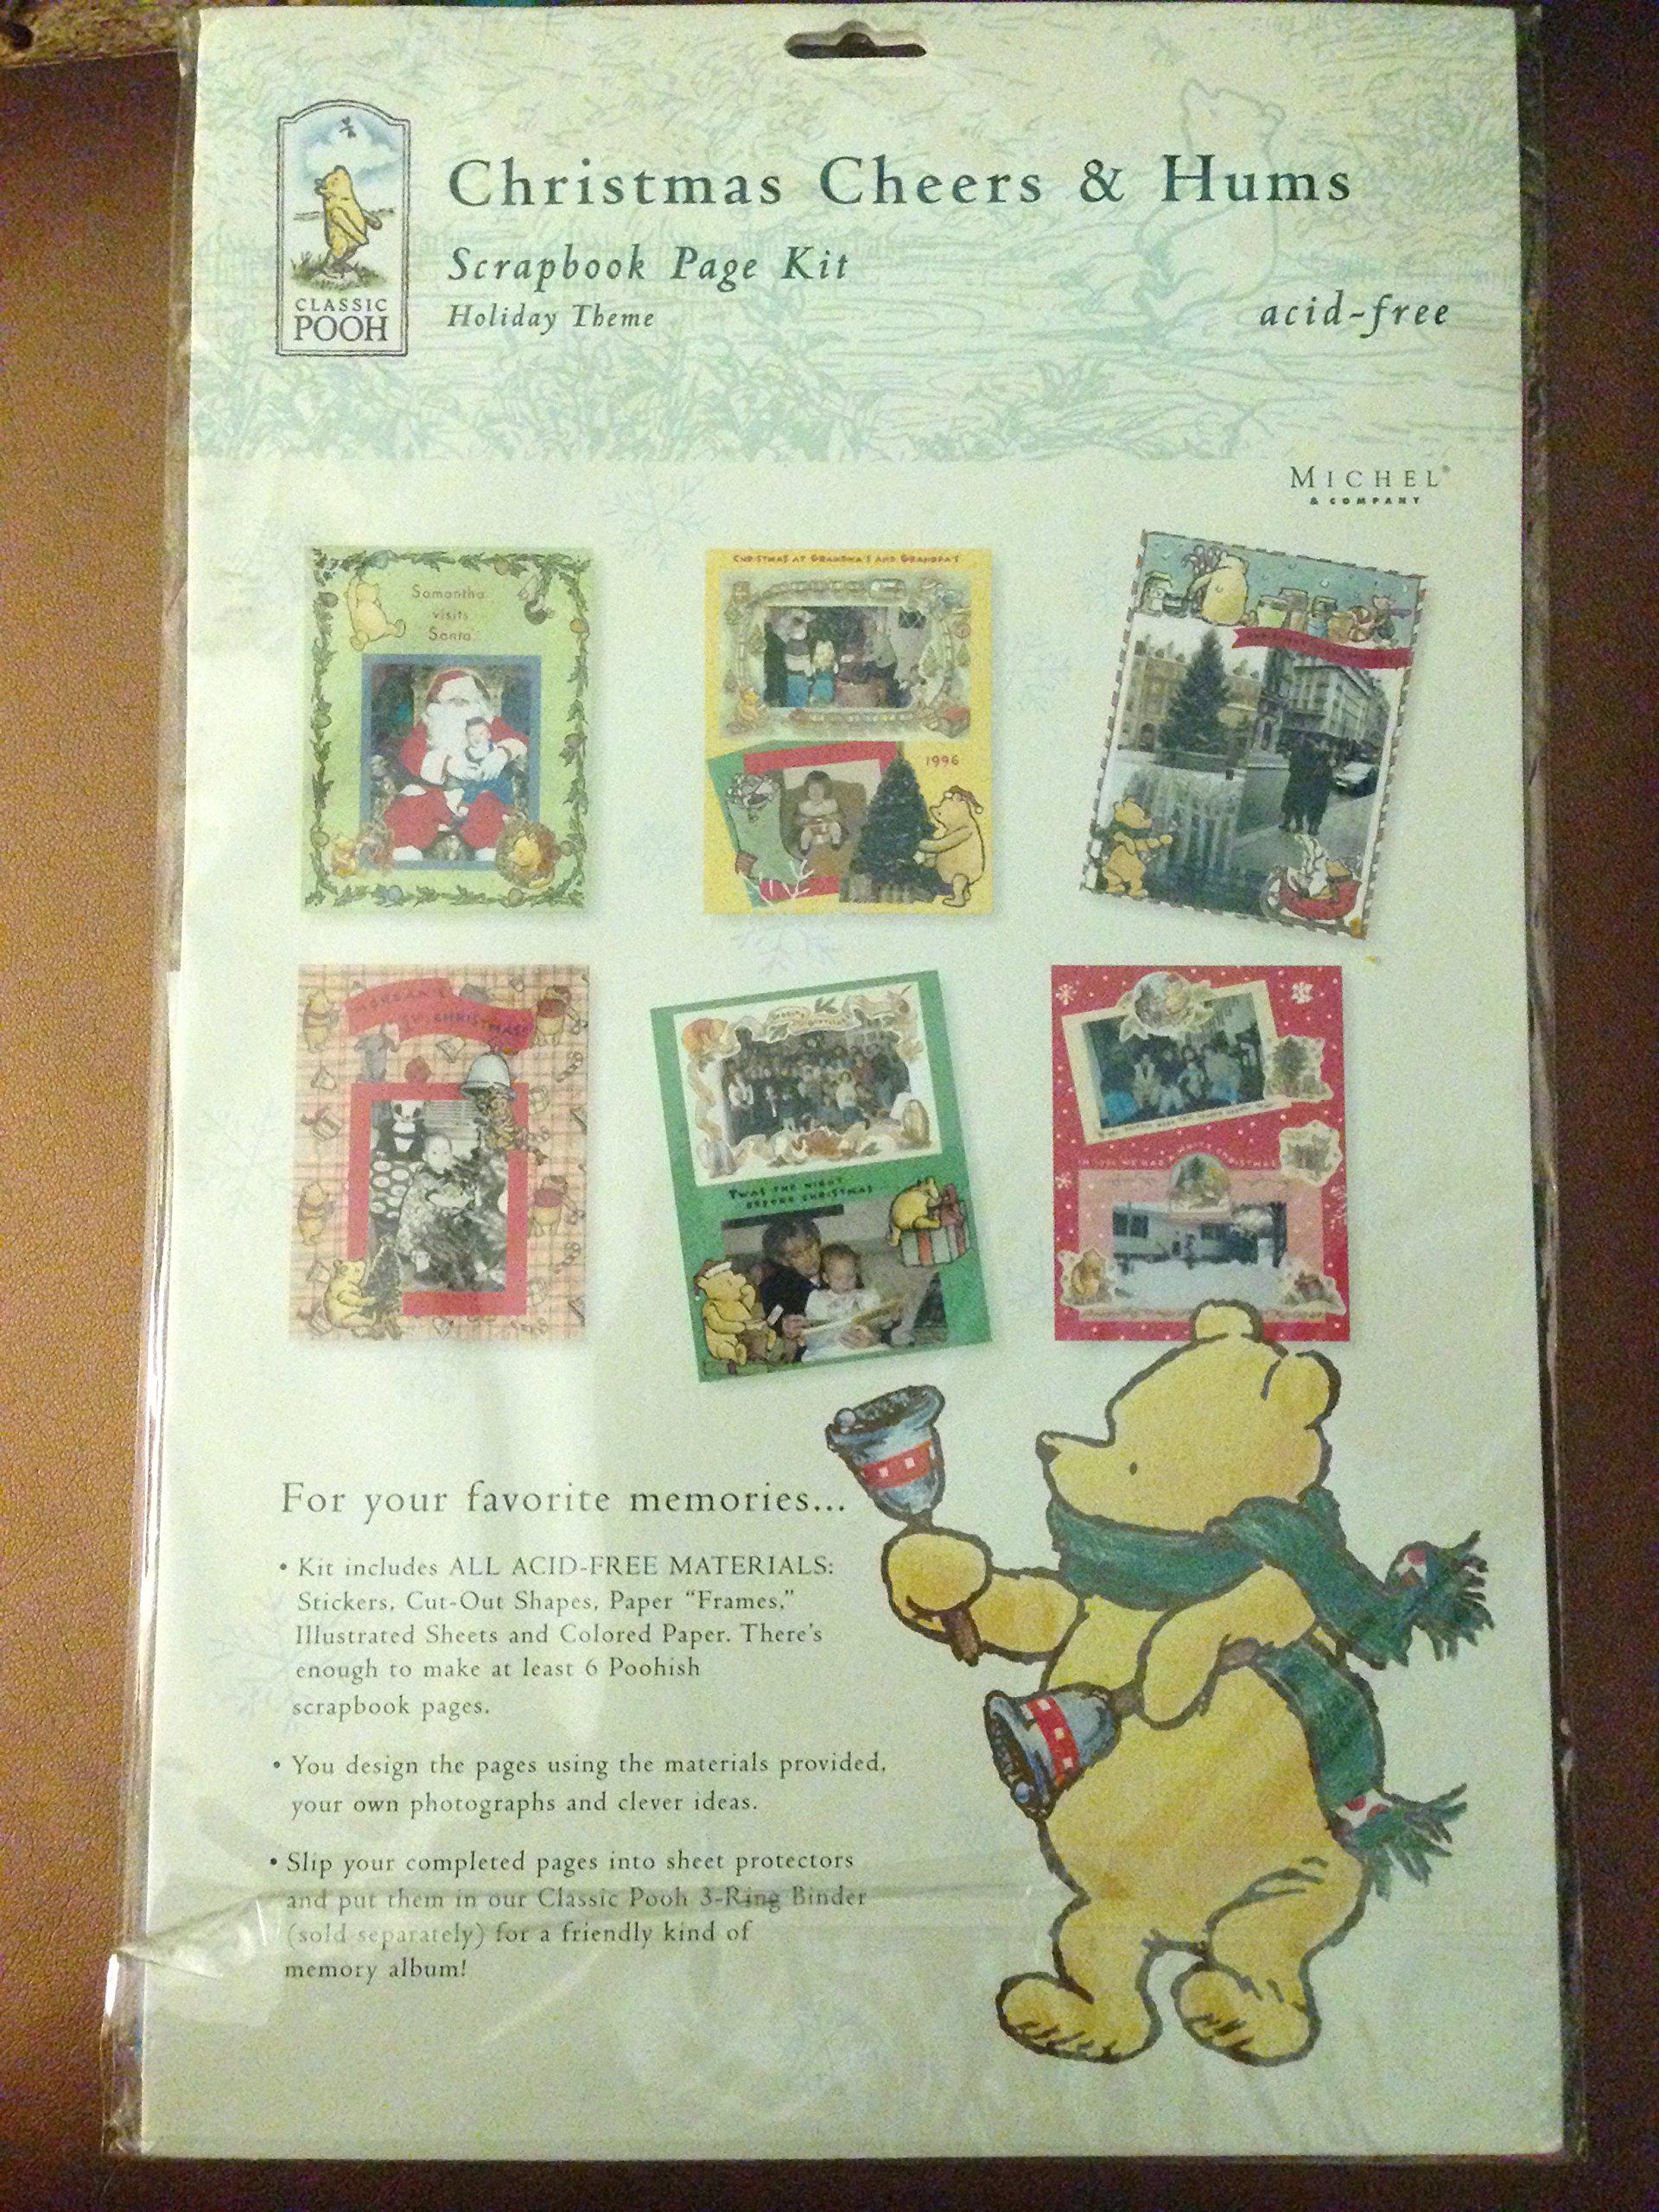 classic pooh christmas cheers & hums scrapbook page kit holiday theme